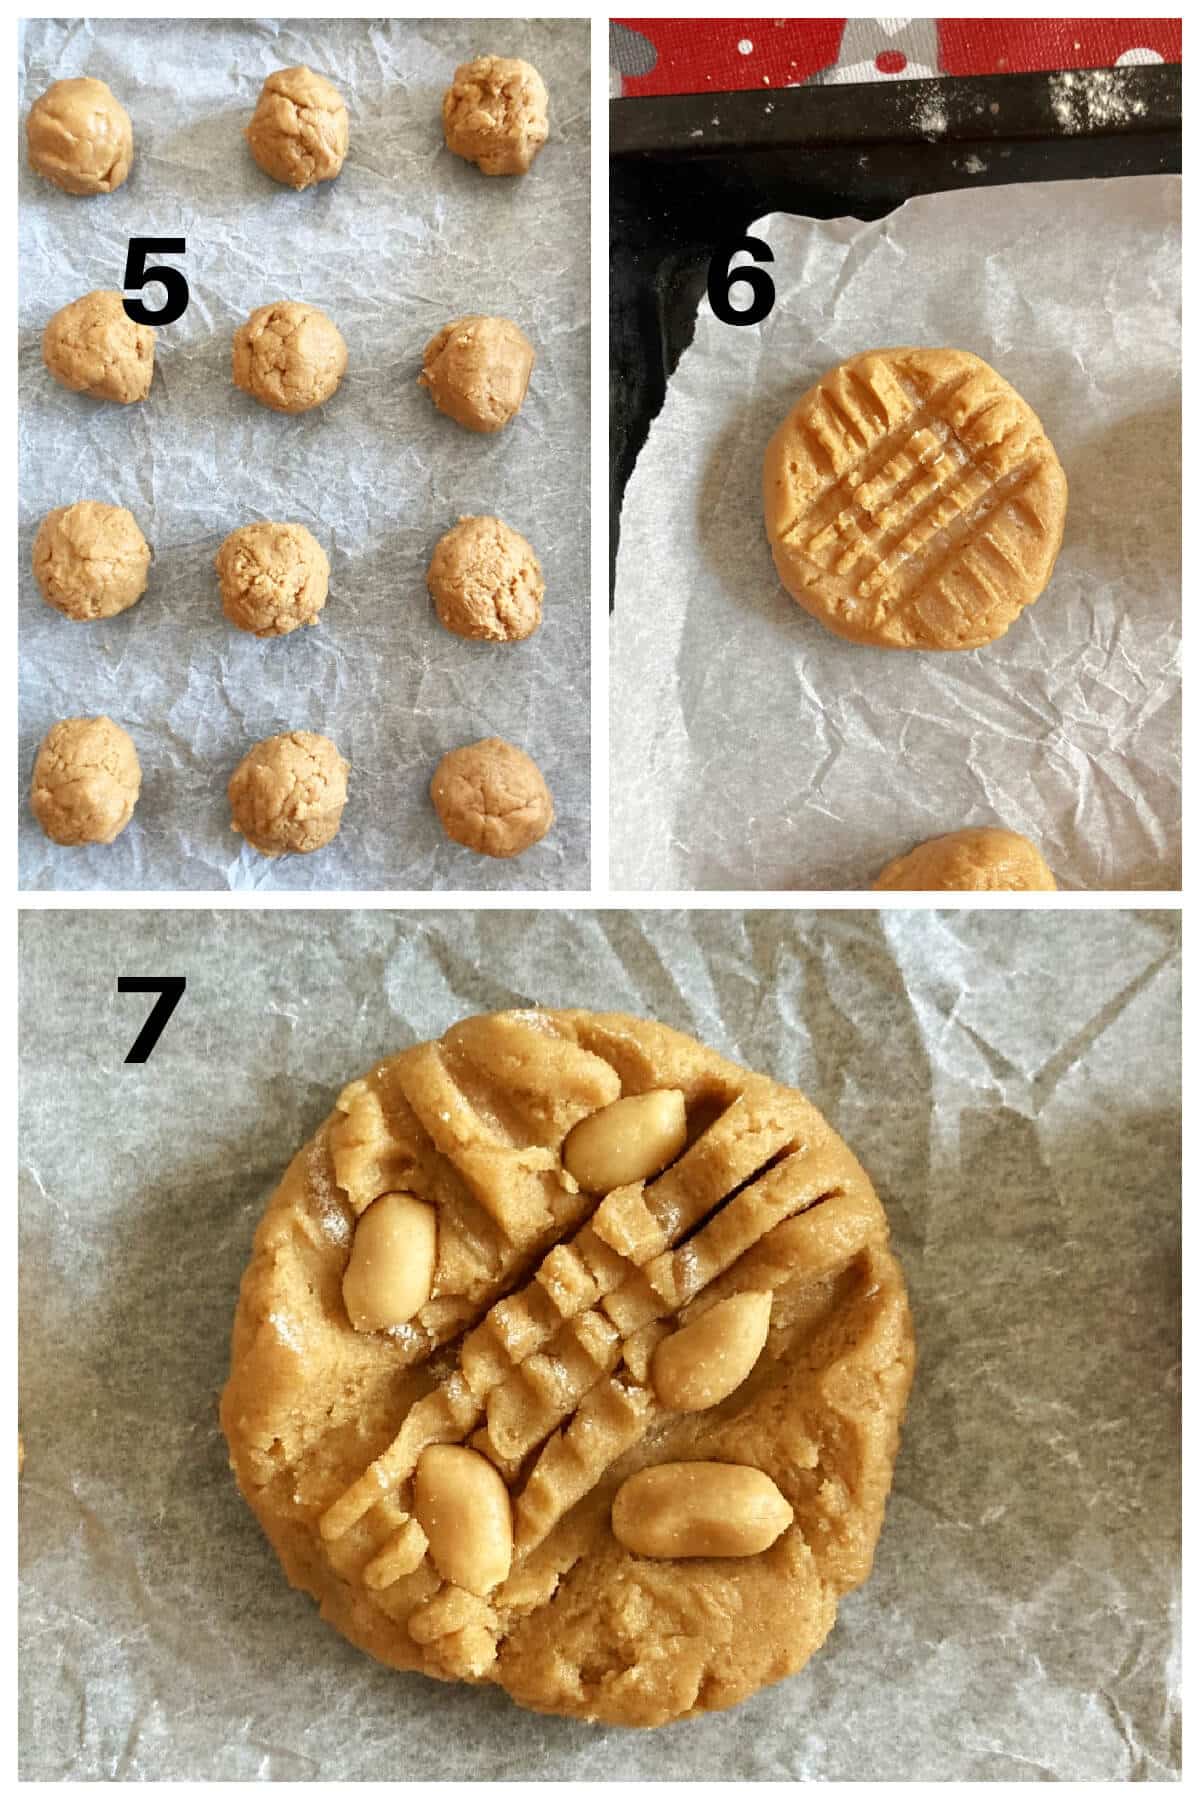 Collage of 3 photos to show how to make peanut butter cookies with salted peanuts.